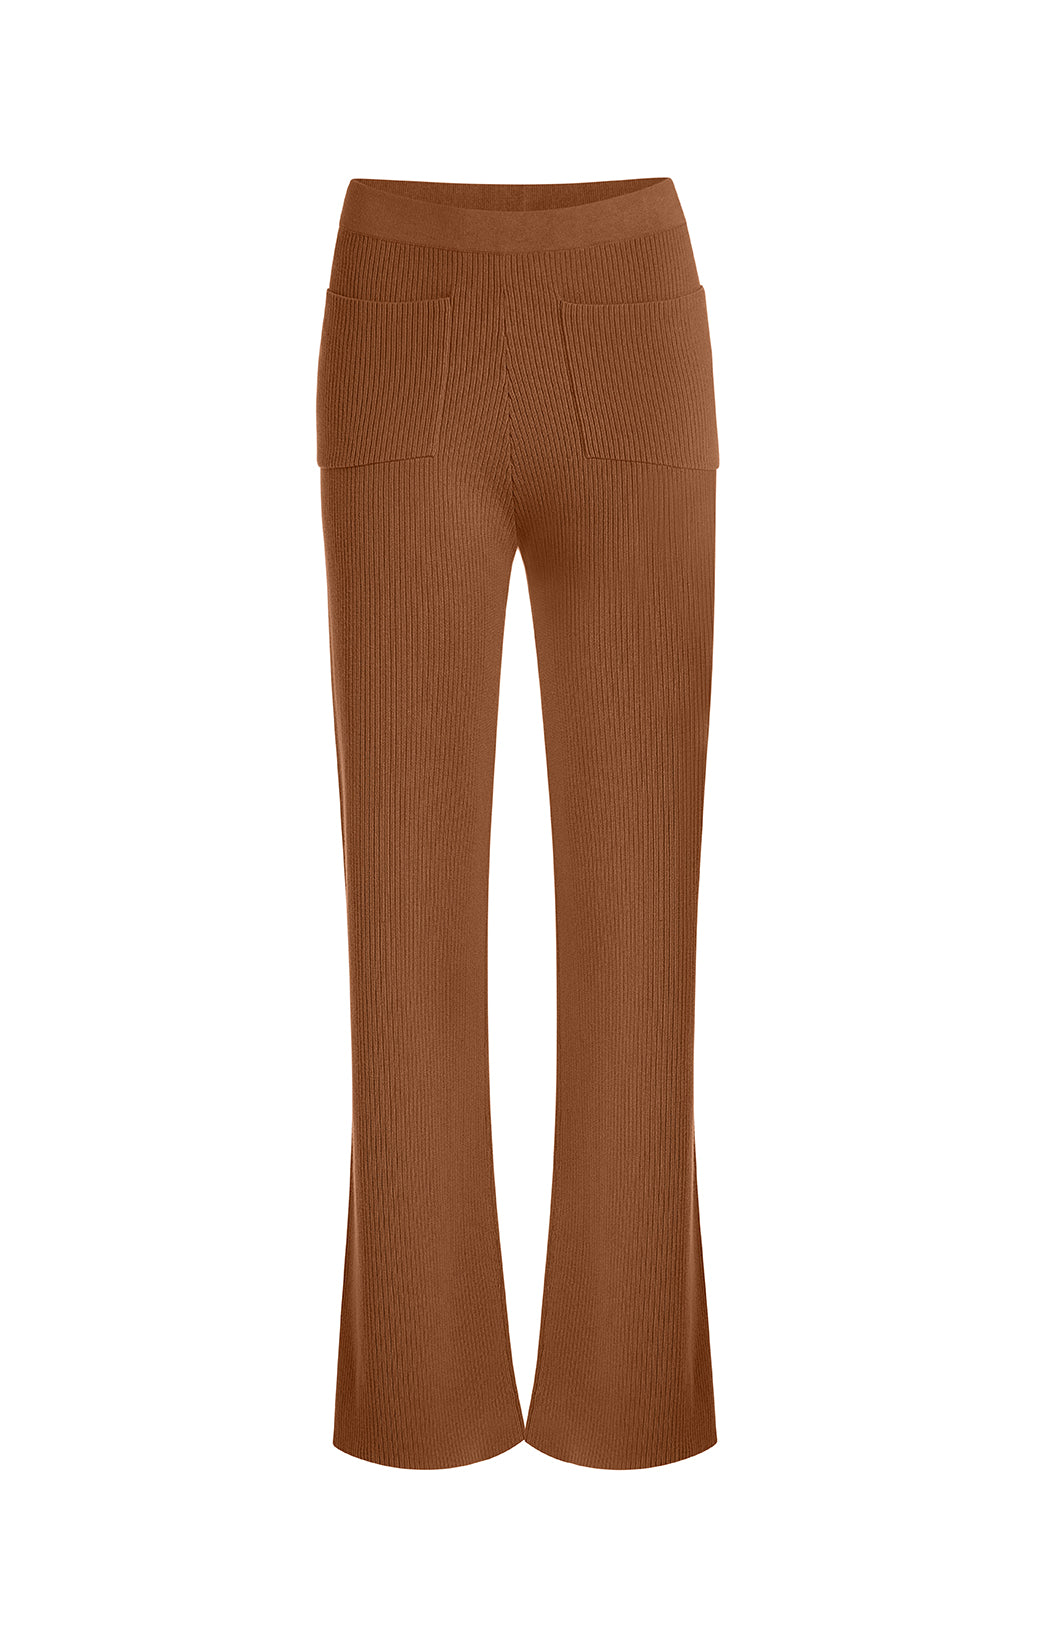 Flare - Pull-On, Wide-Leg Ponte Pants -  Product Image